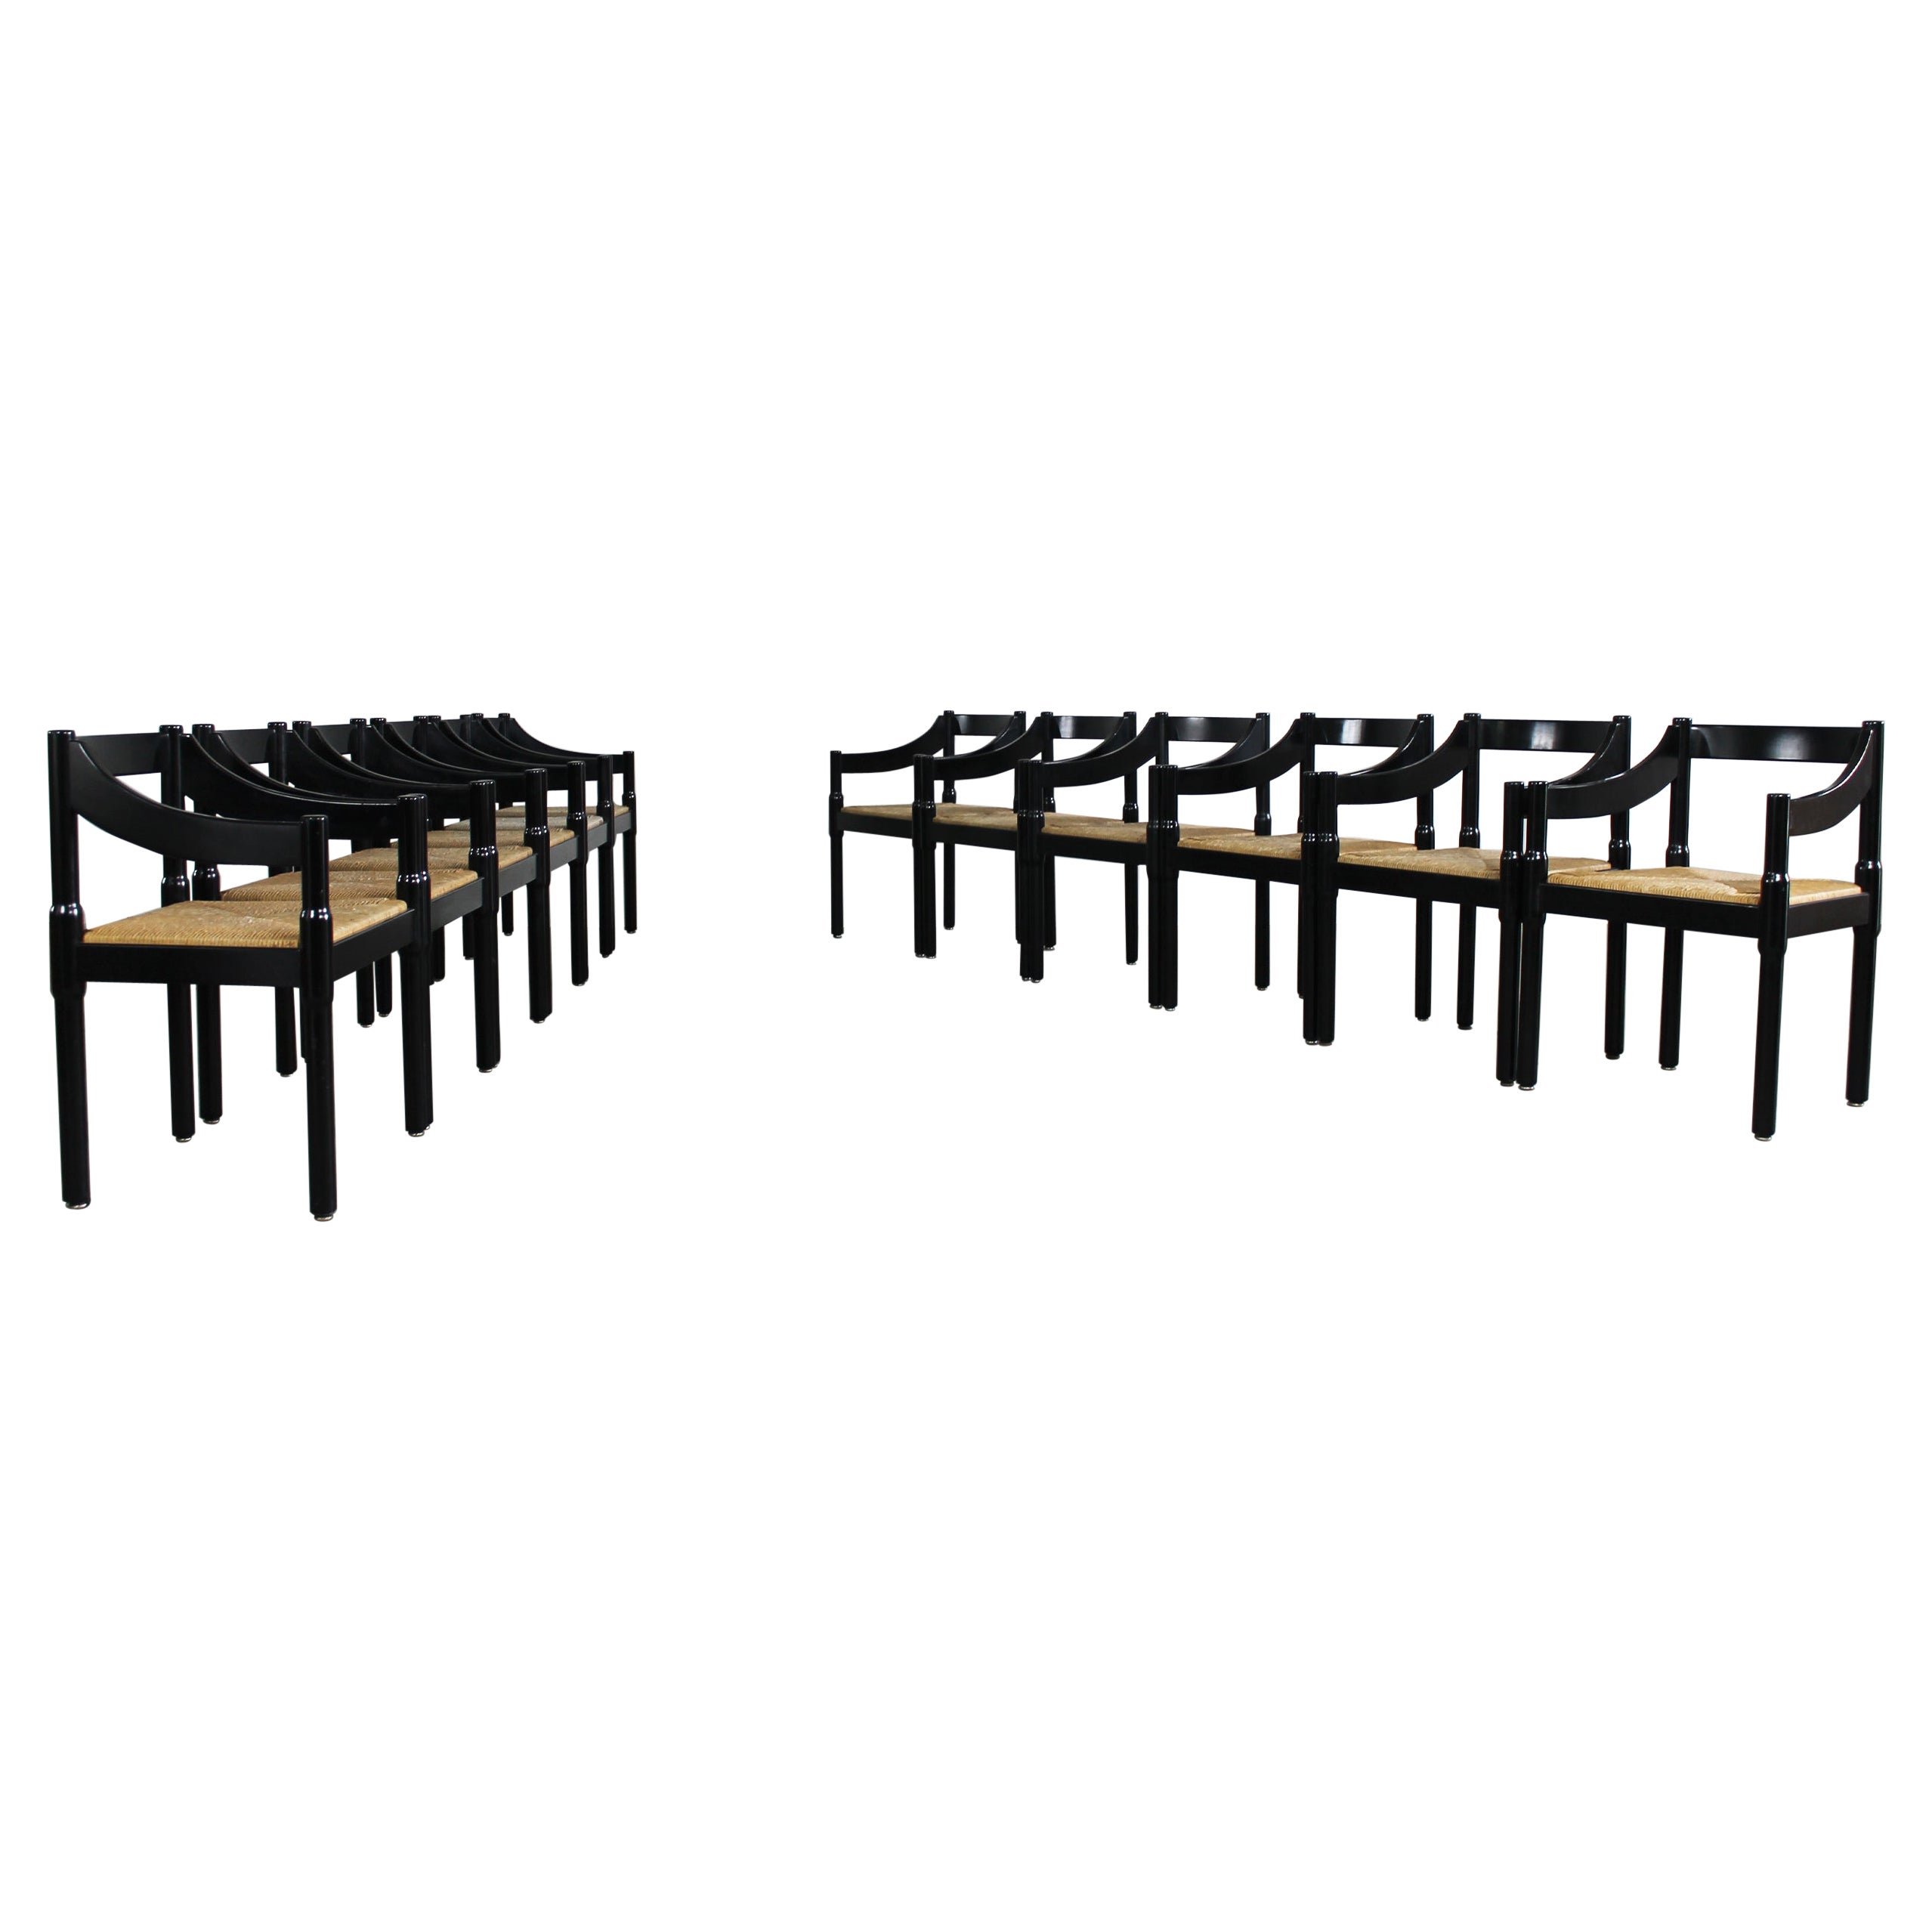 Vico Magistretti Set of Twelve Black Carimate Chairs by Cassina 1960s